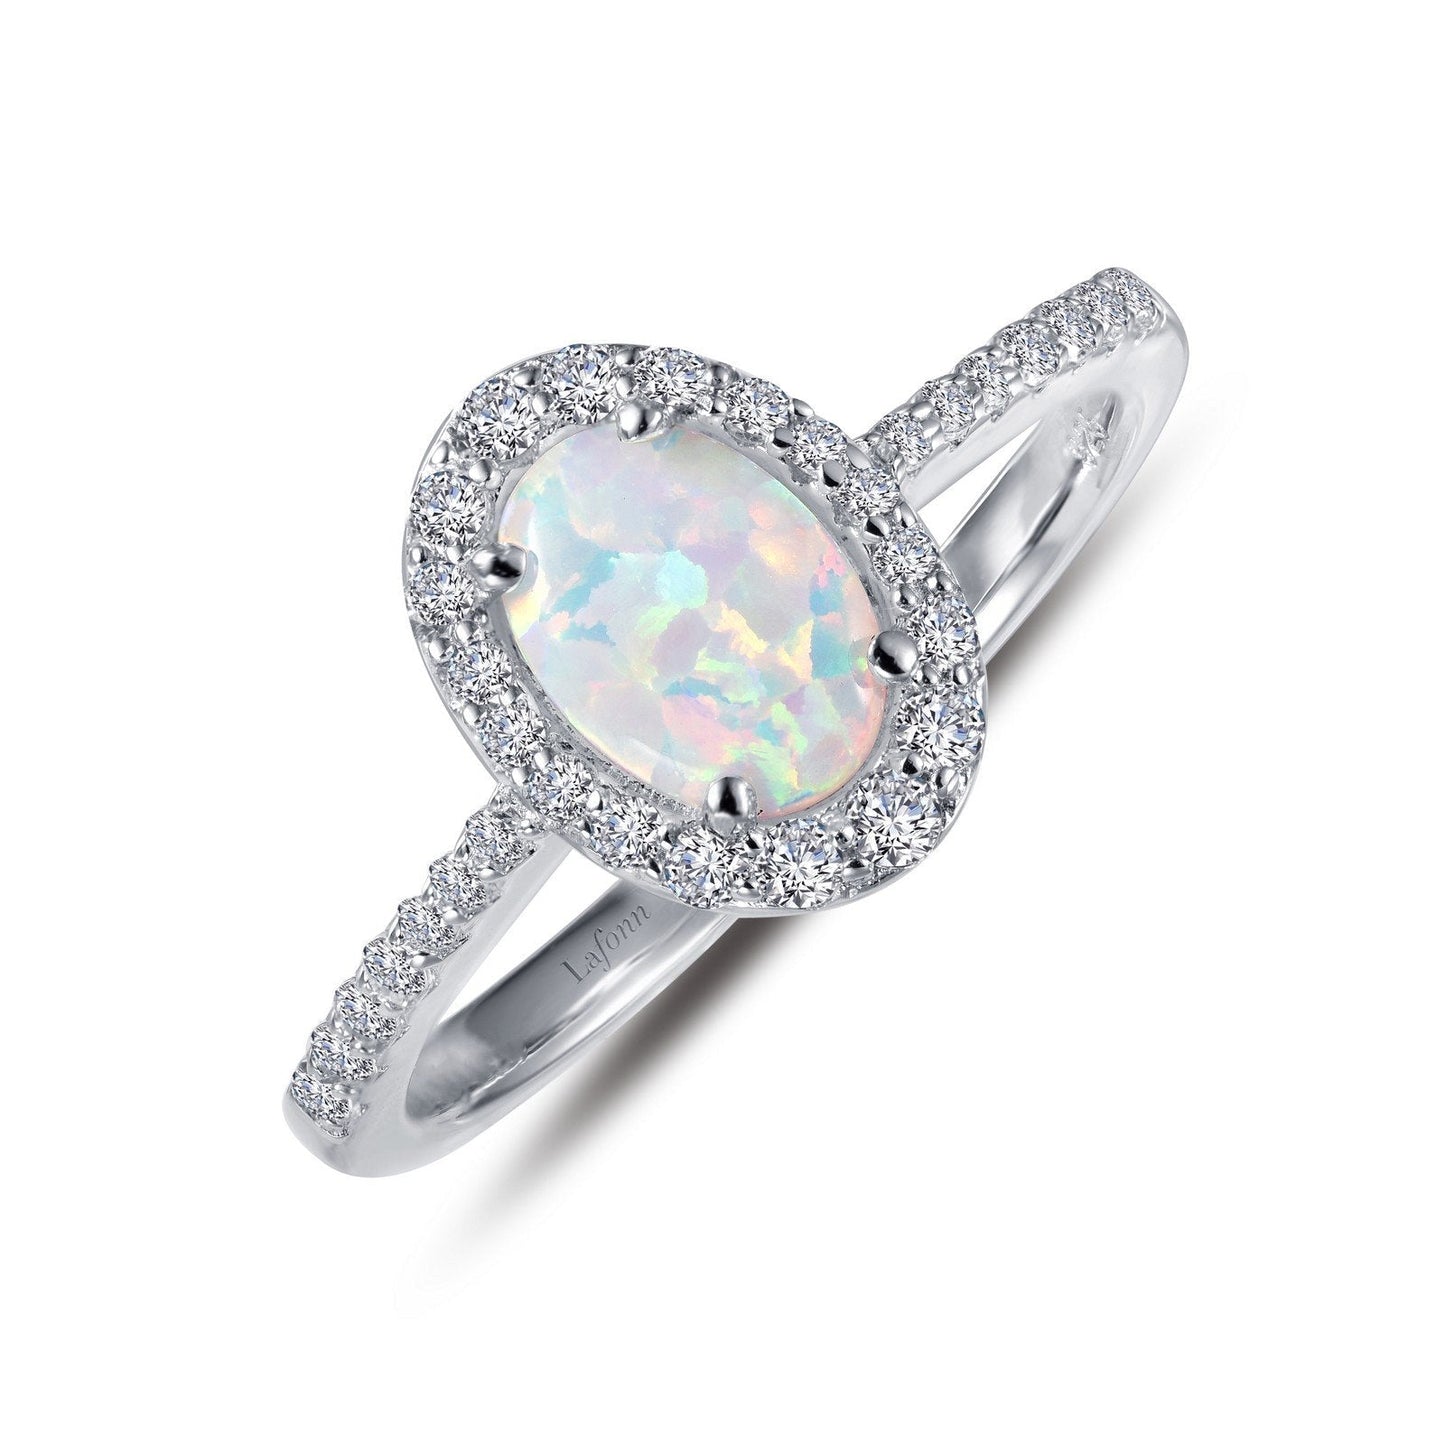 Lafonn Halo Engagement Ring Opal RINGS Size 9 Platinum 1.92 CTS Width approx. 10.2mm